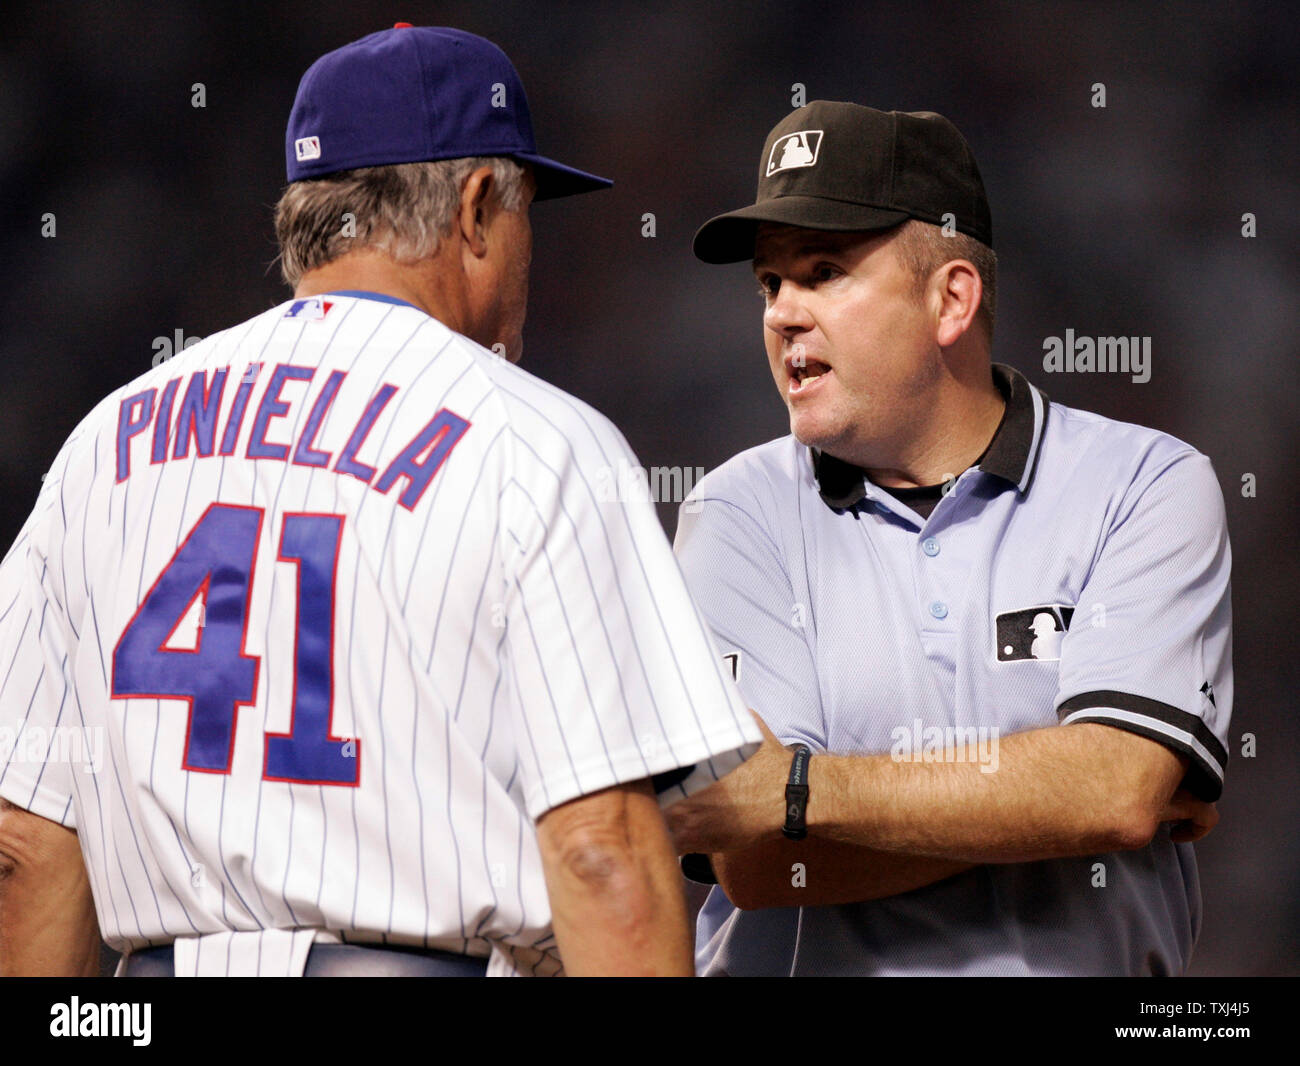 Who Should Replace Lou Piniella As Cubs Manager? - Bleed Cubbie Blue